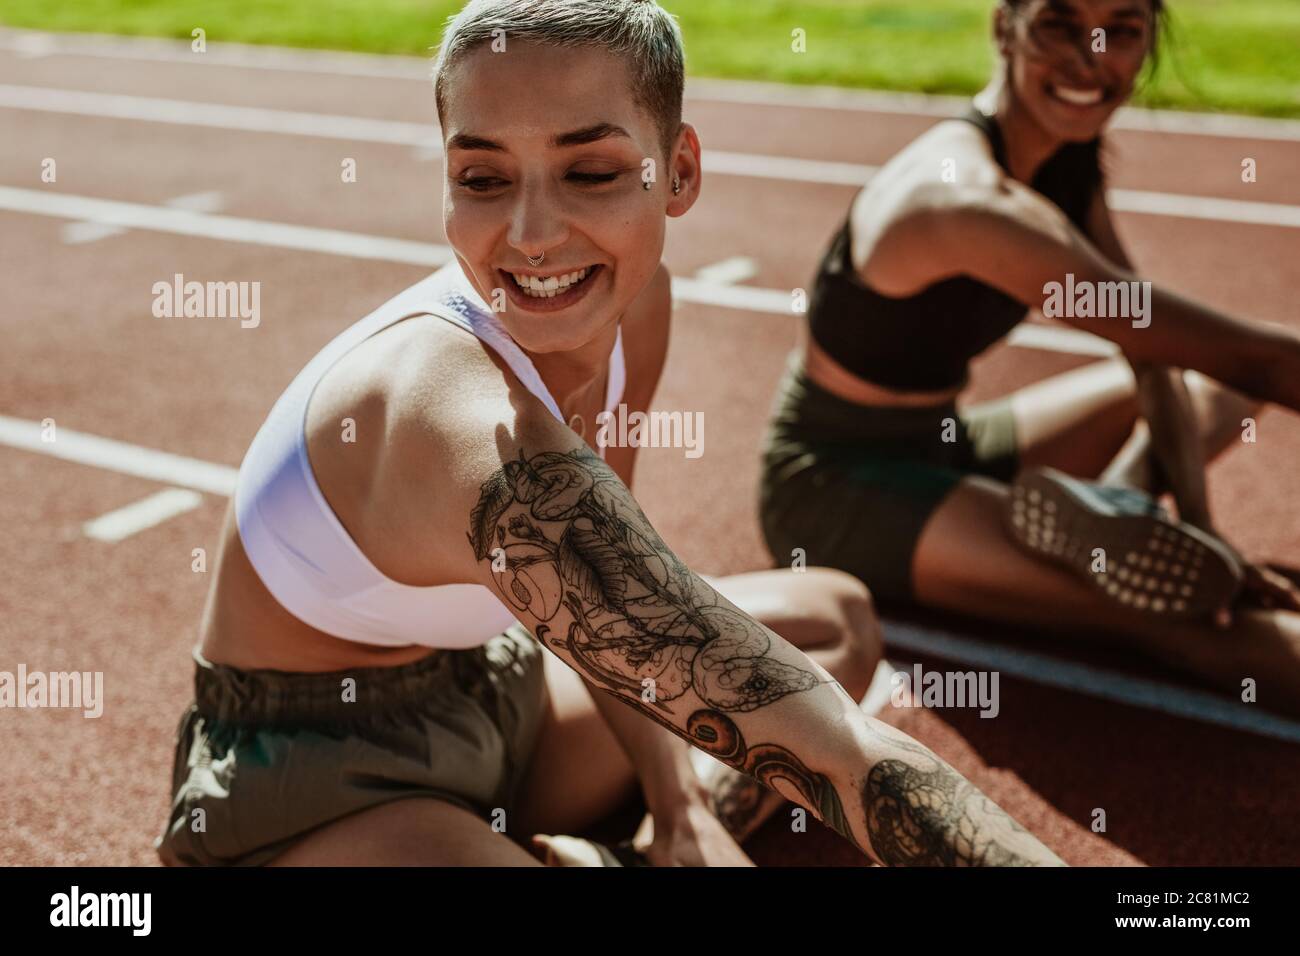 Runners stretching legs and smiling before a track event. Two young runners practicing at athletics stadium. Stock Photo